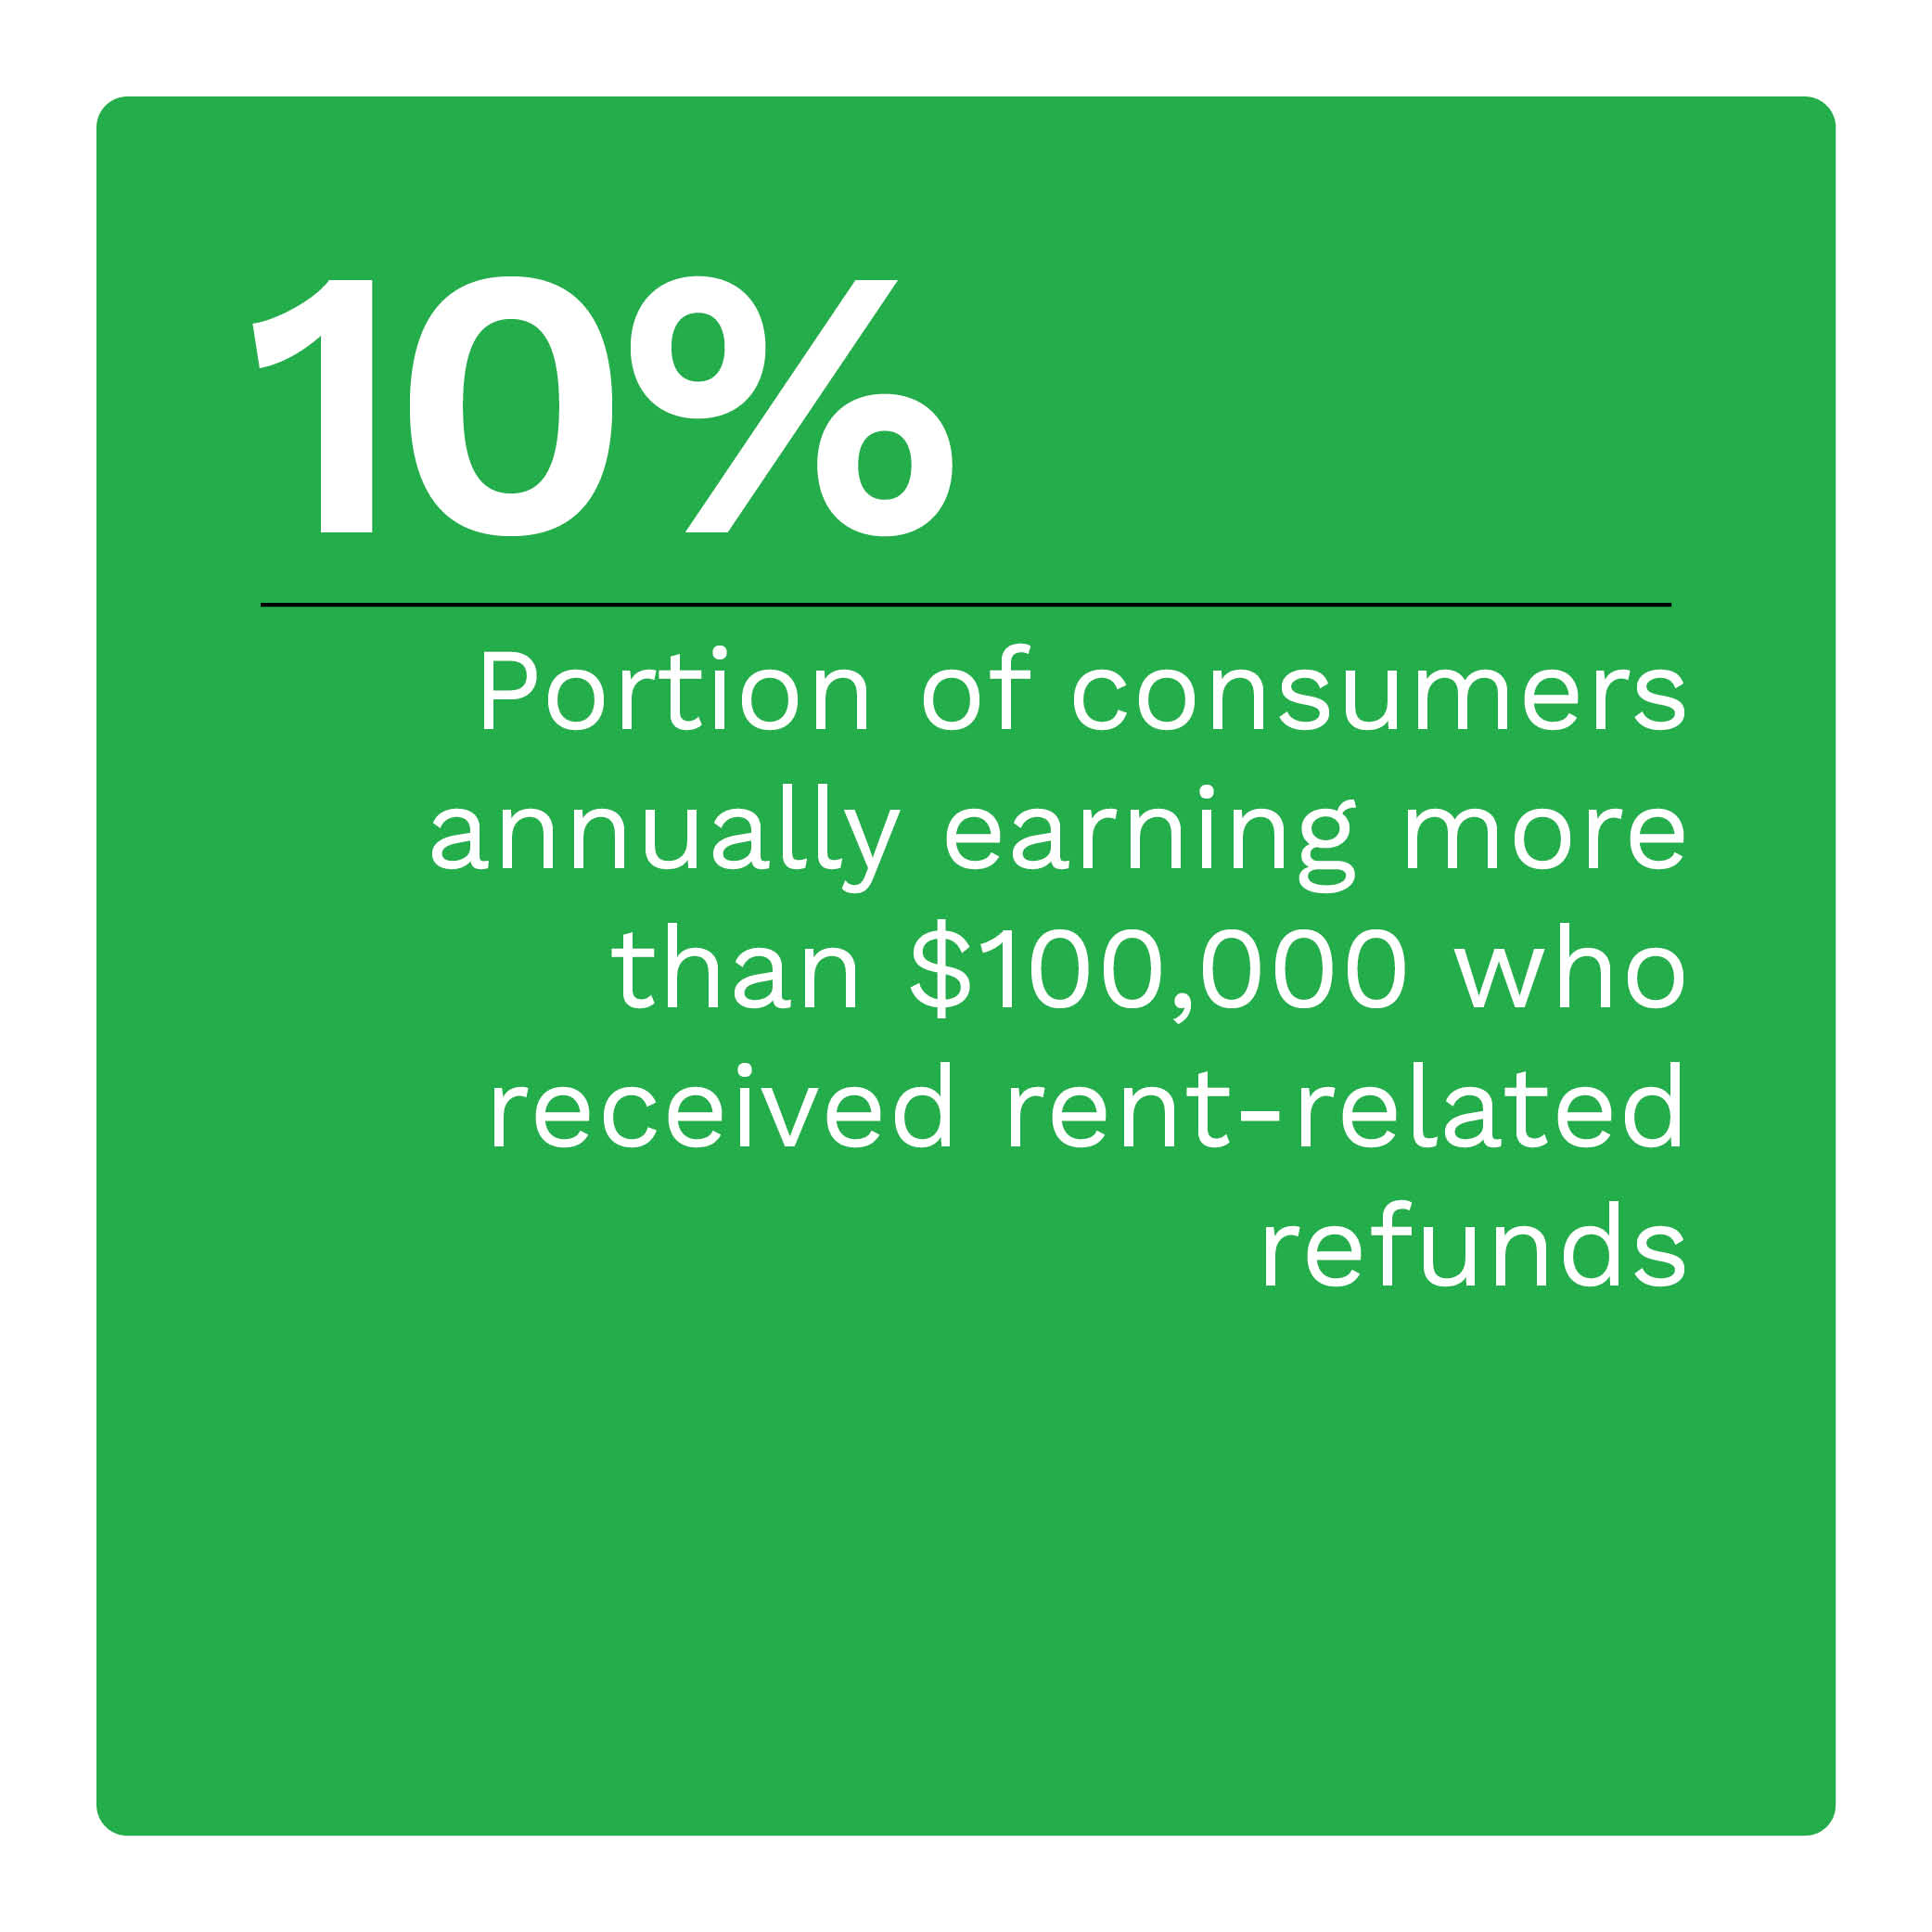 10%: Portion of consumers making more than $100,000 annually who received rent-related refunds